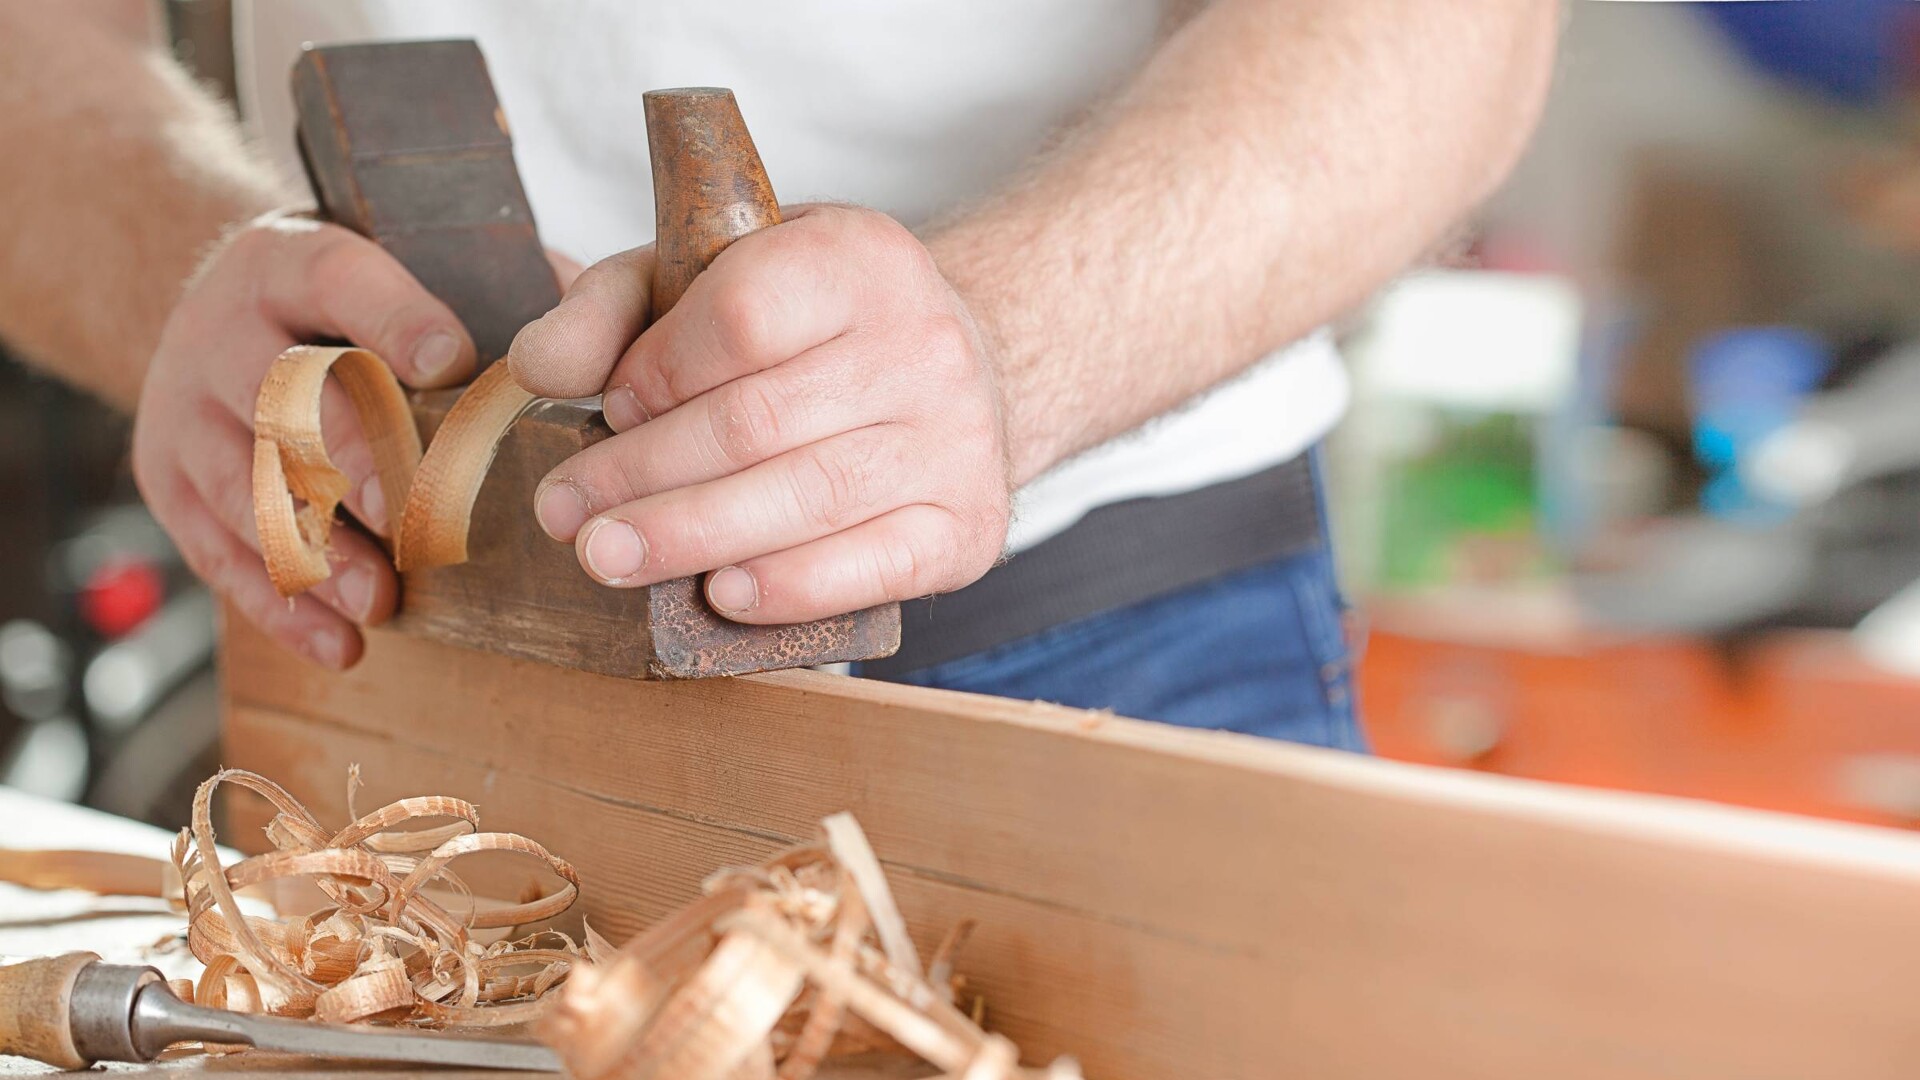 List of the most common carpentry tools and tricks to use them